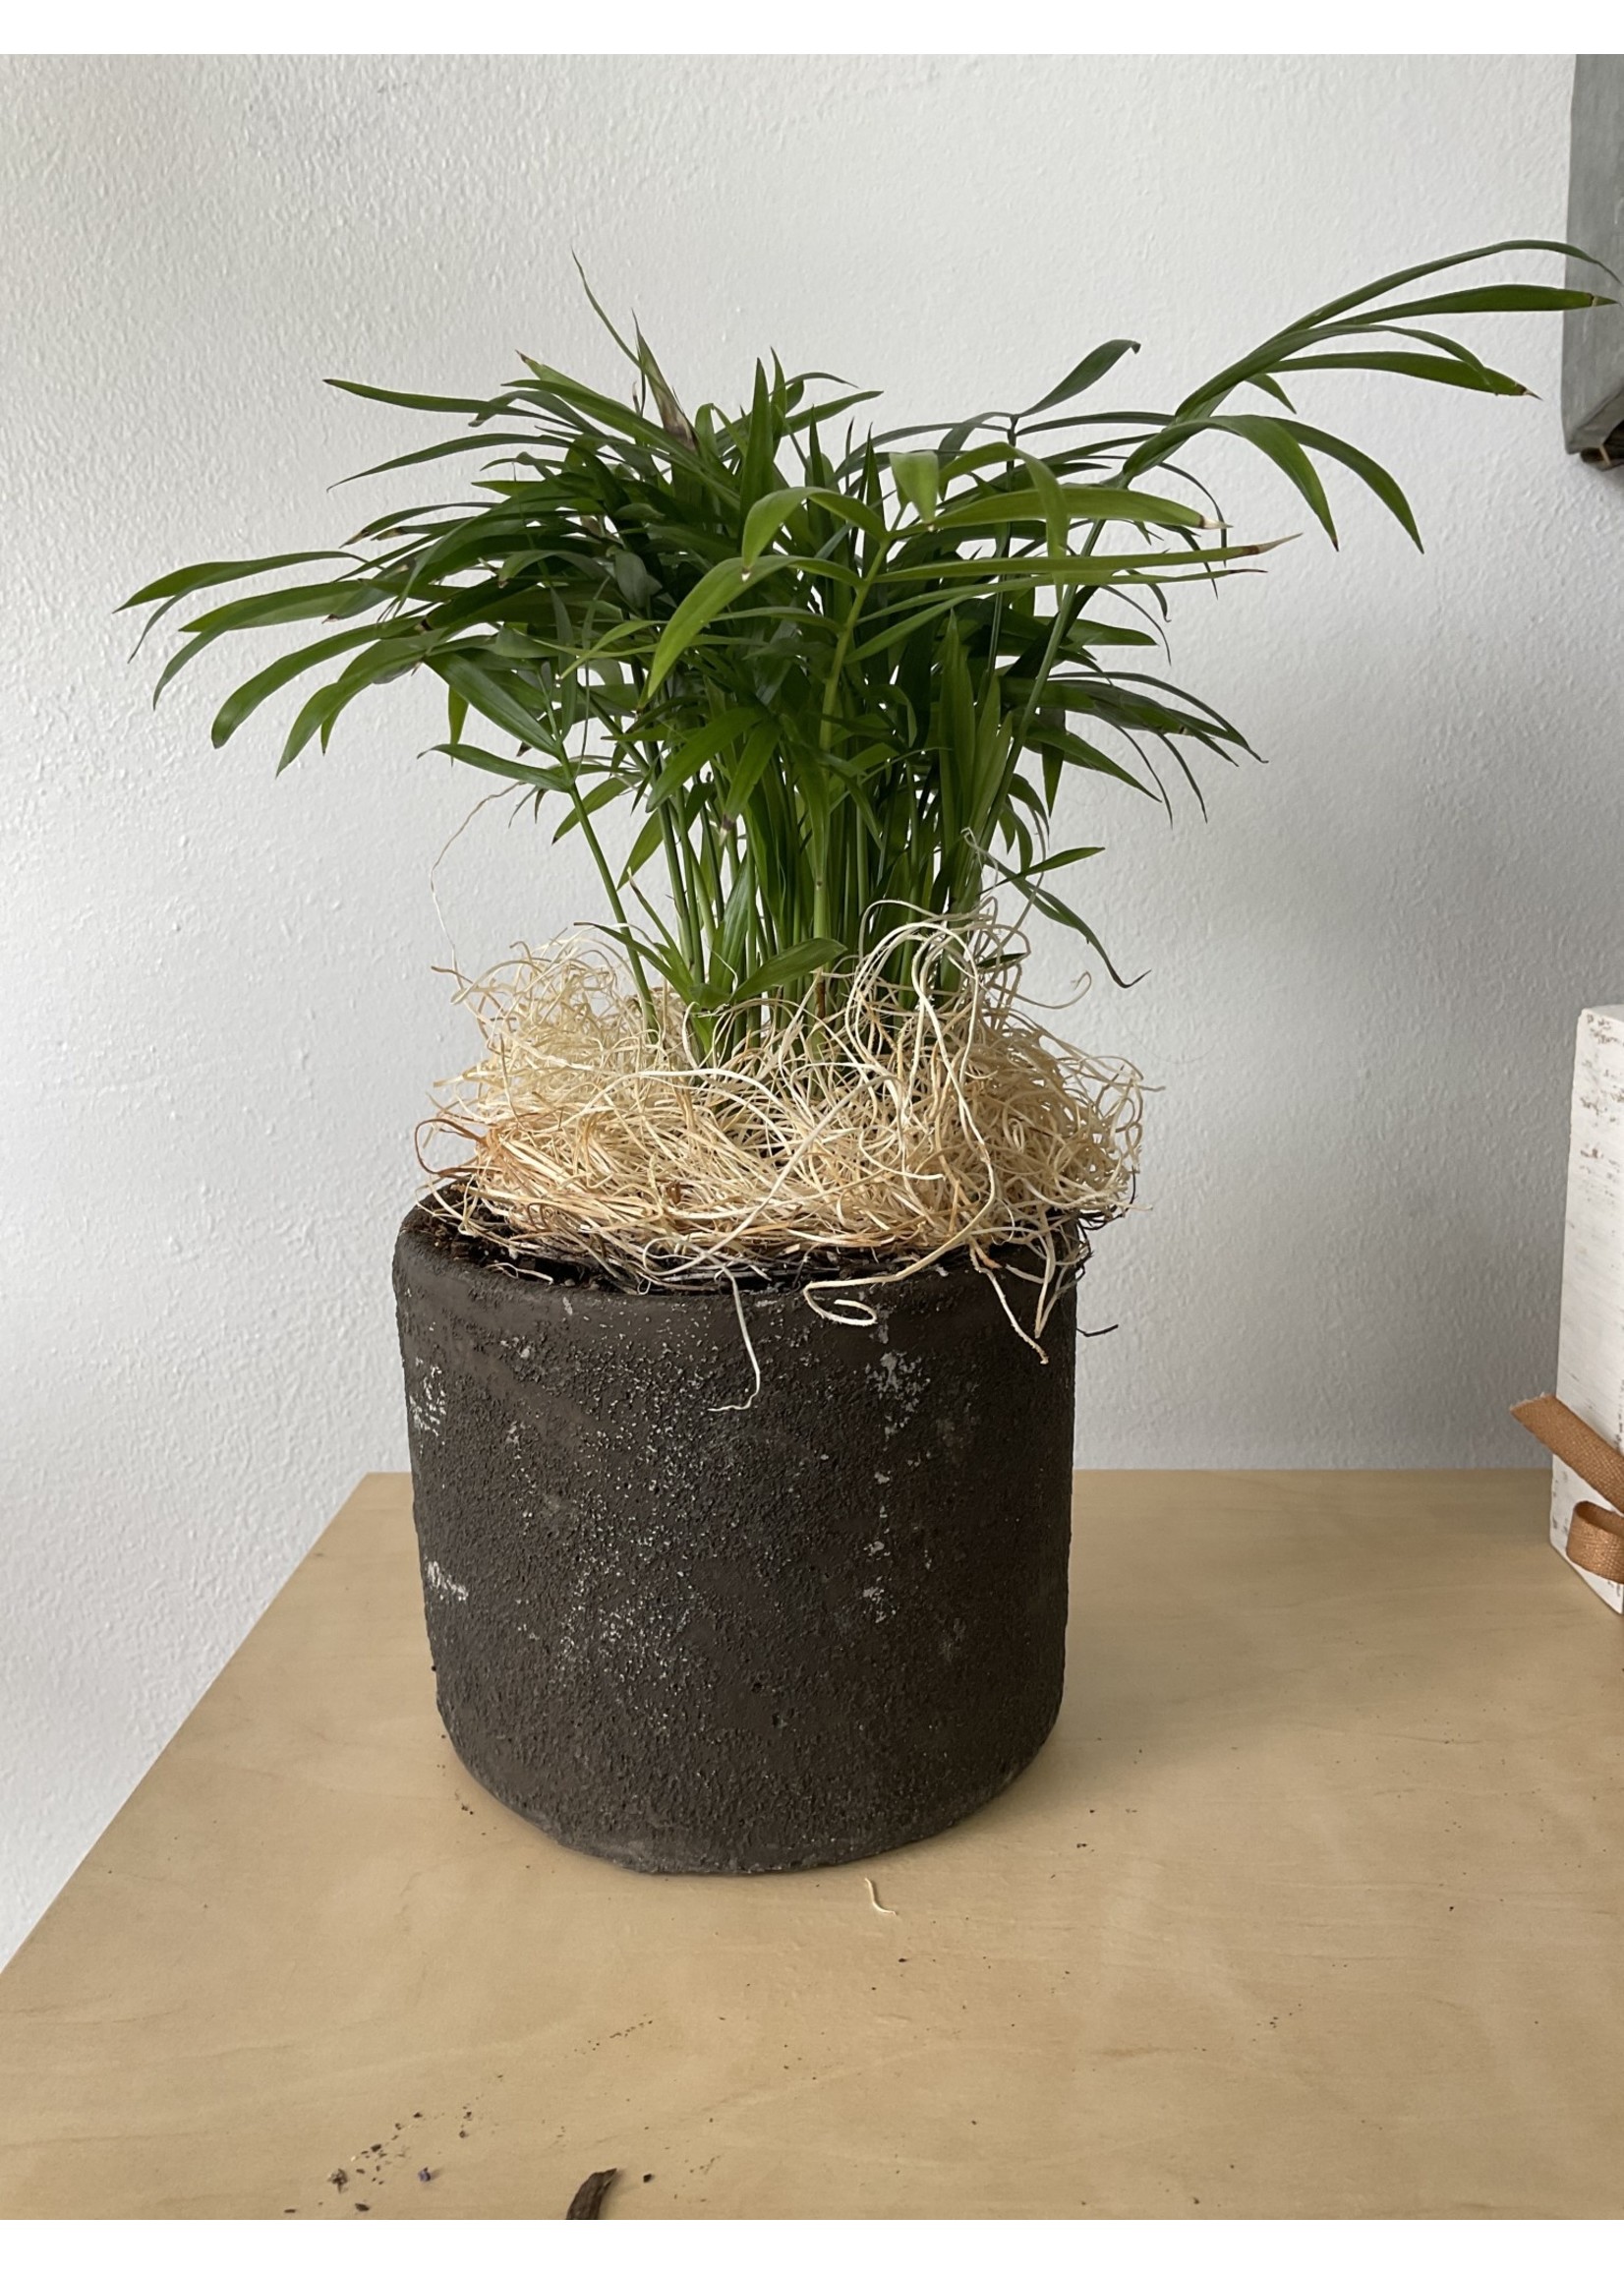 My New Favorite Thing Plant/Pot Combo Parlor Palm in Brown Ceramic